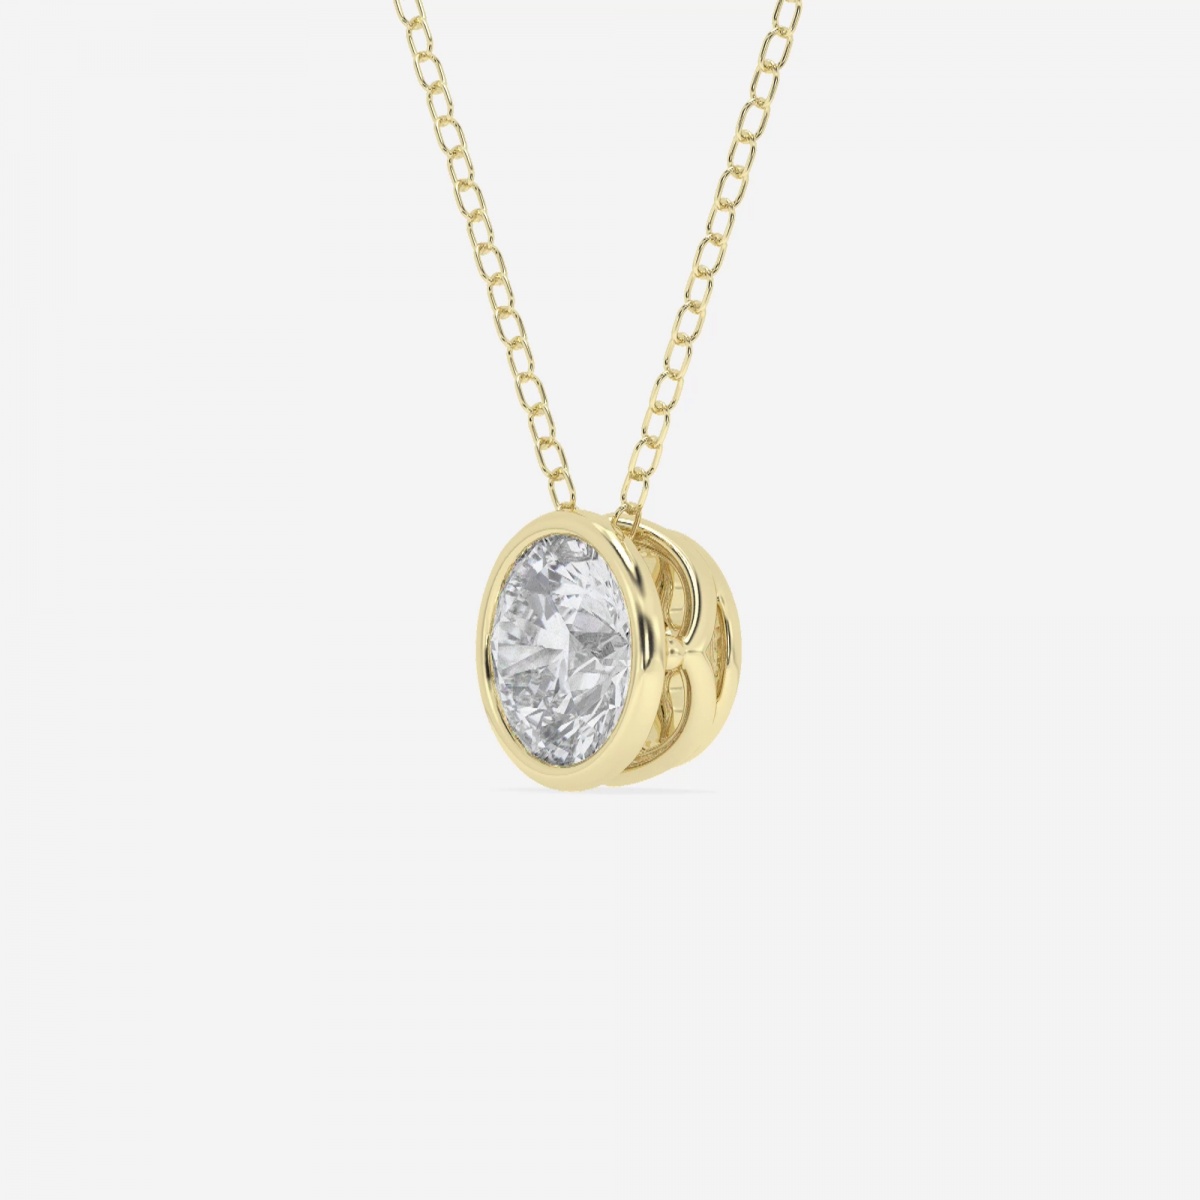 Additional Image 1 for  1 ctw Round Lab Grown Diamond Bezel Set Solitaire Pendant with Adjustable Chain